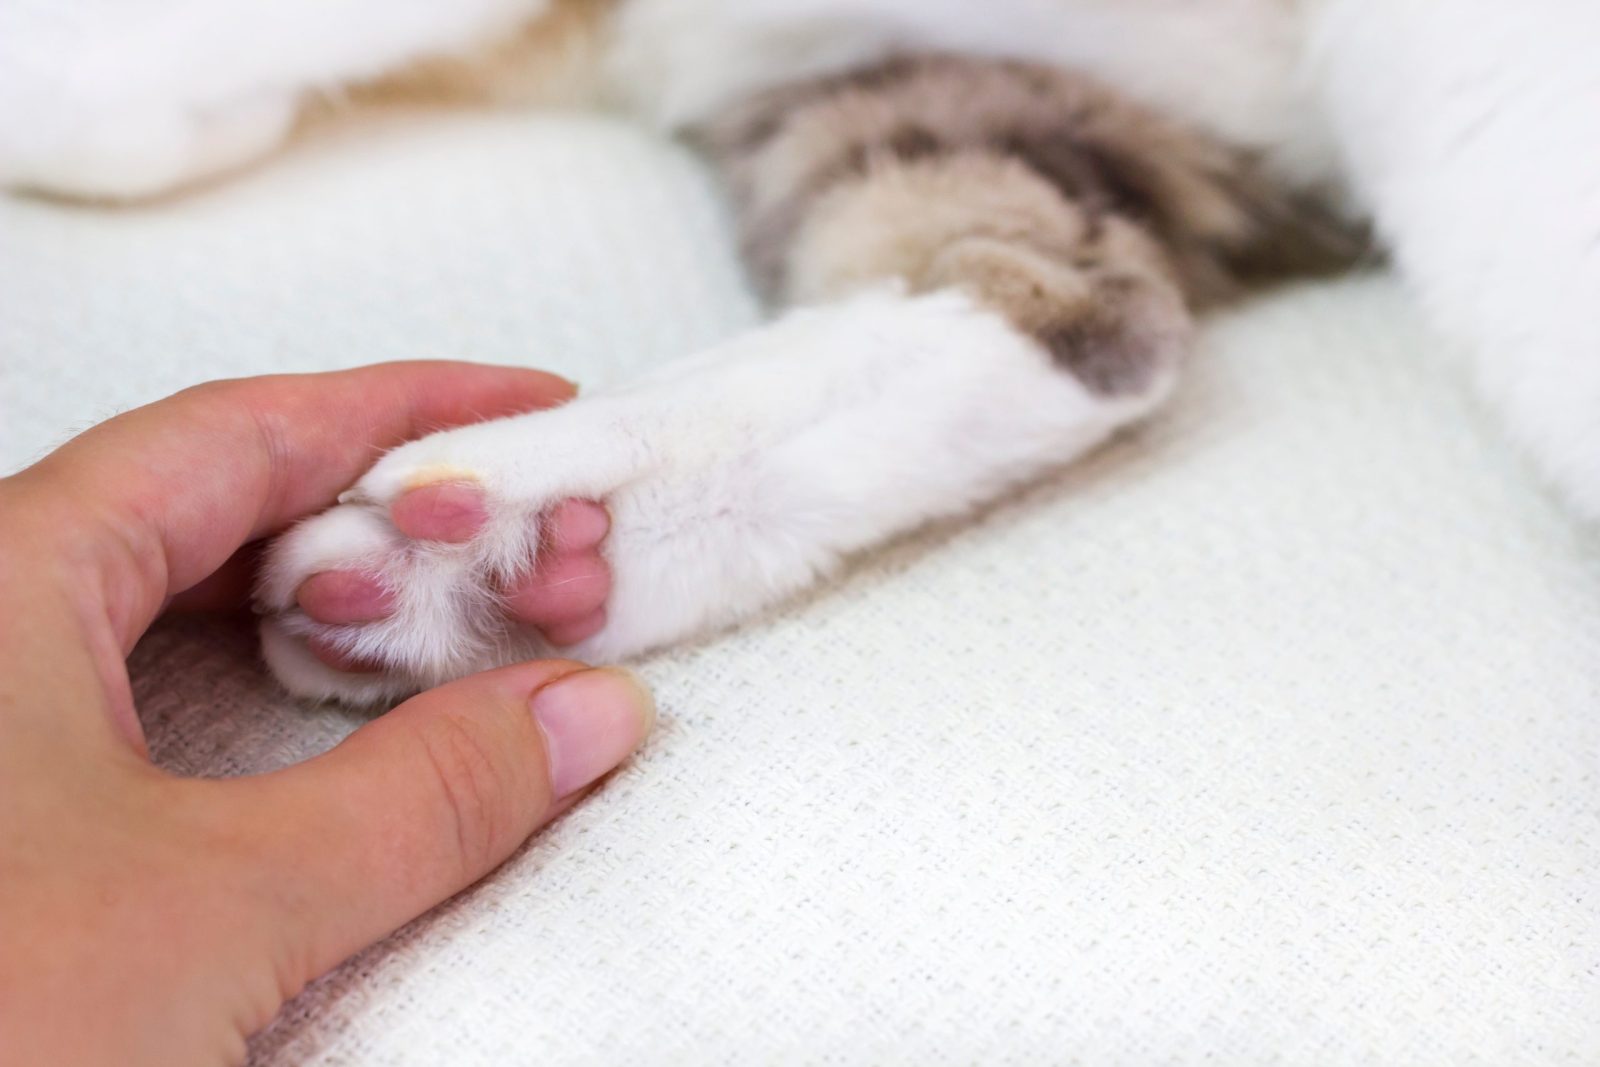 someone holding a cat's paw that has been declawed